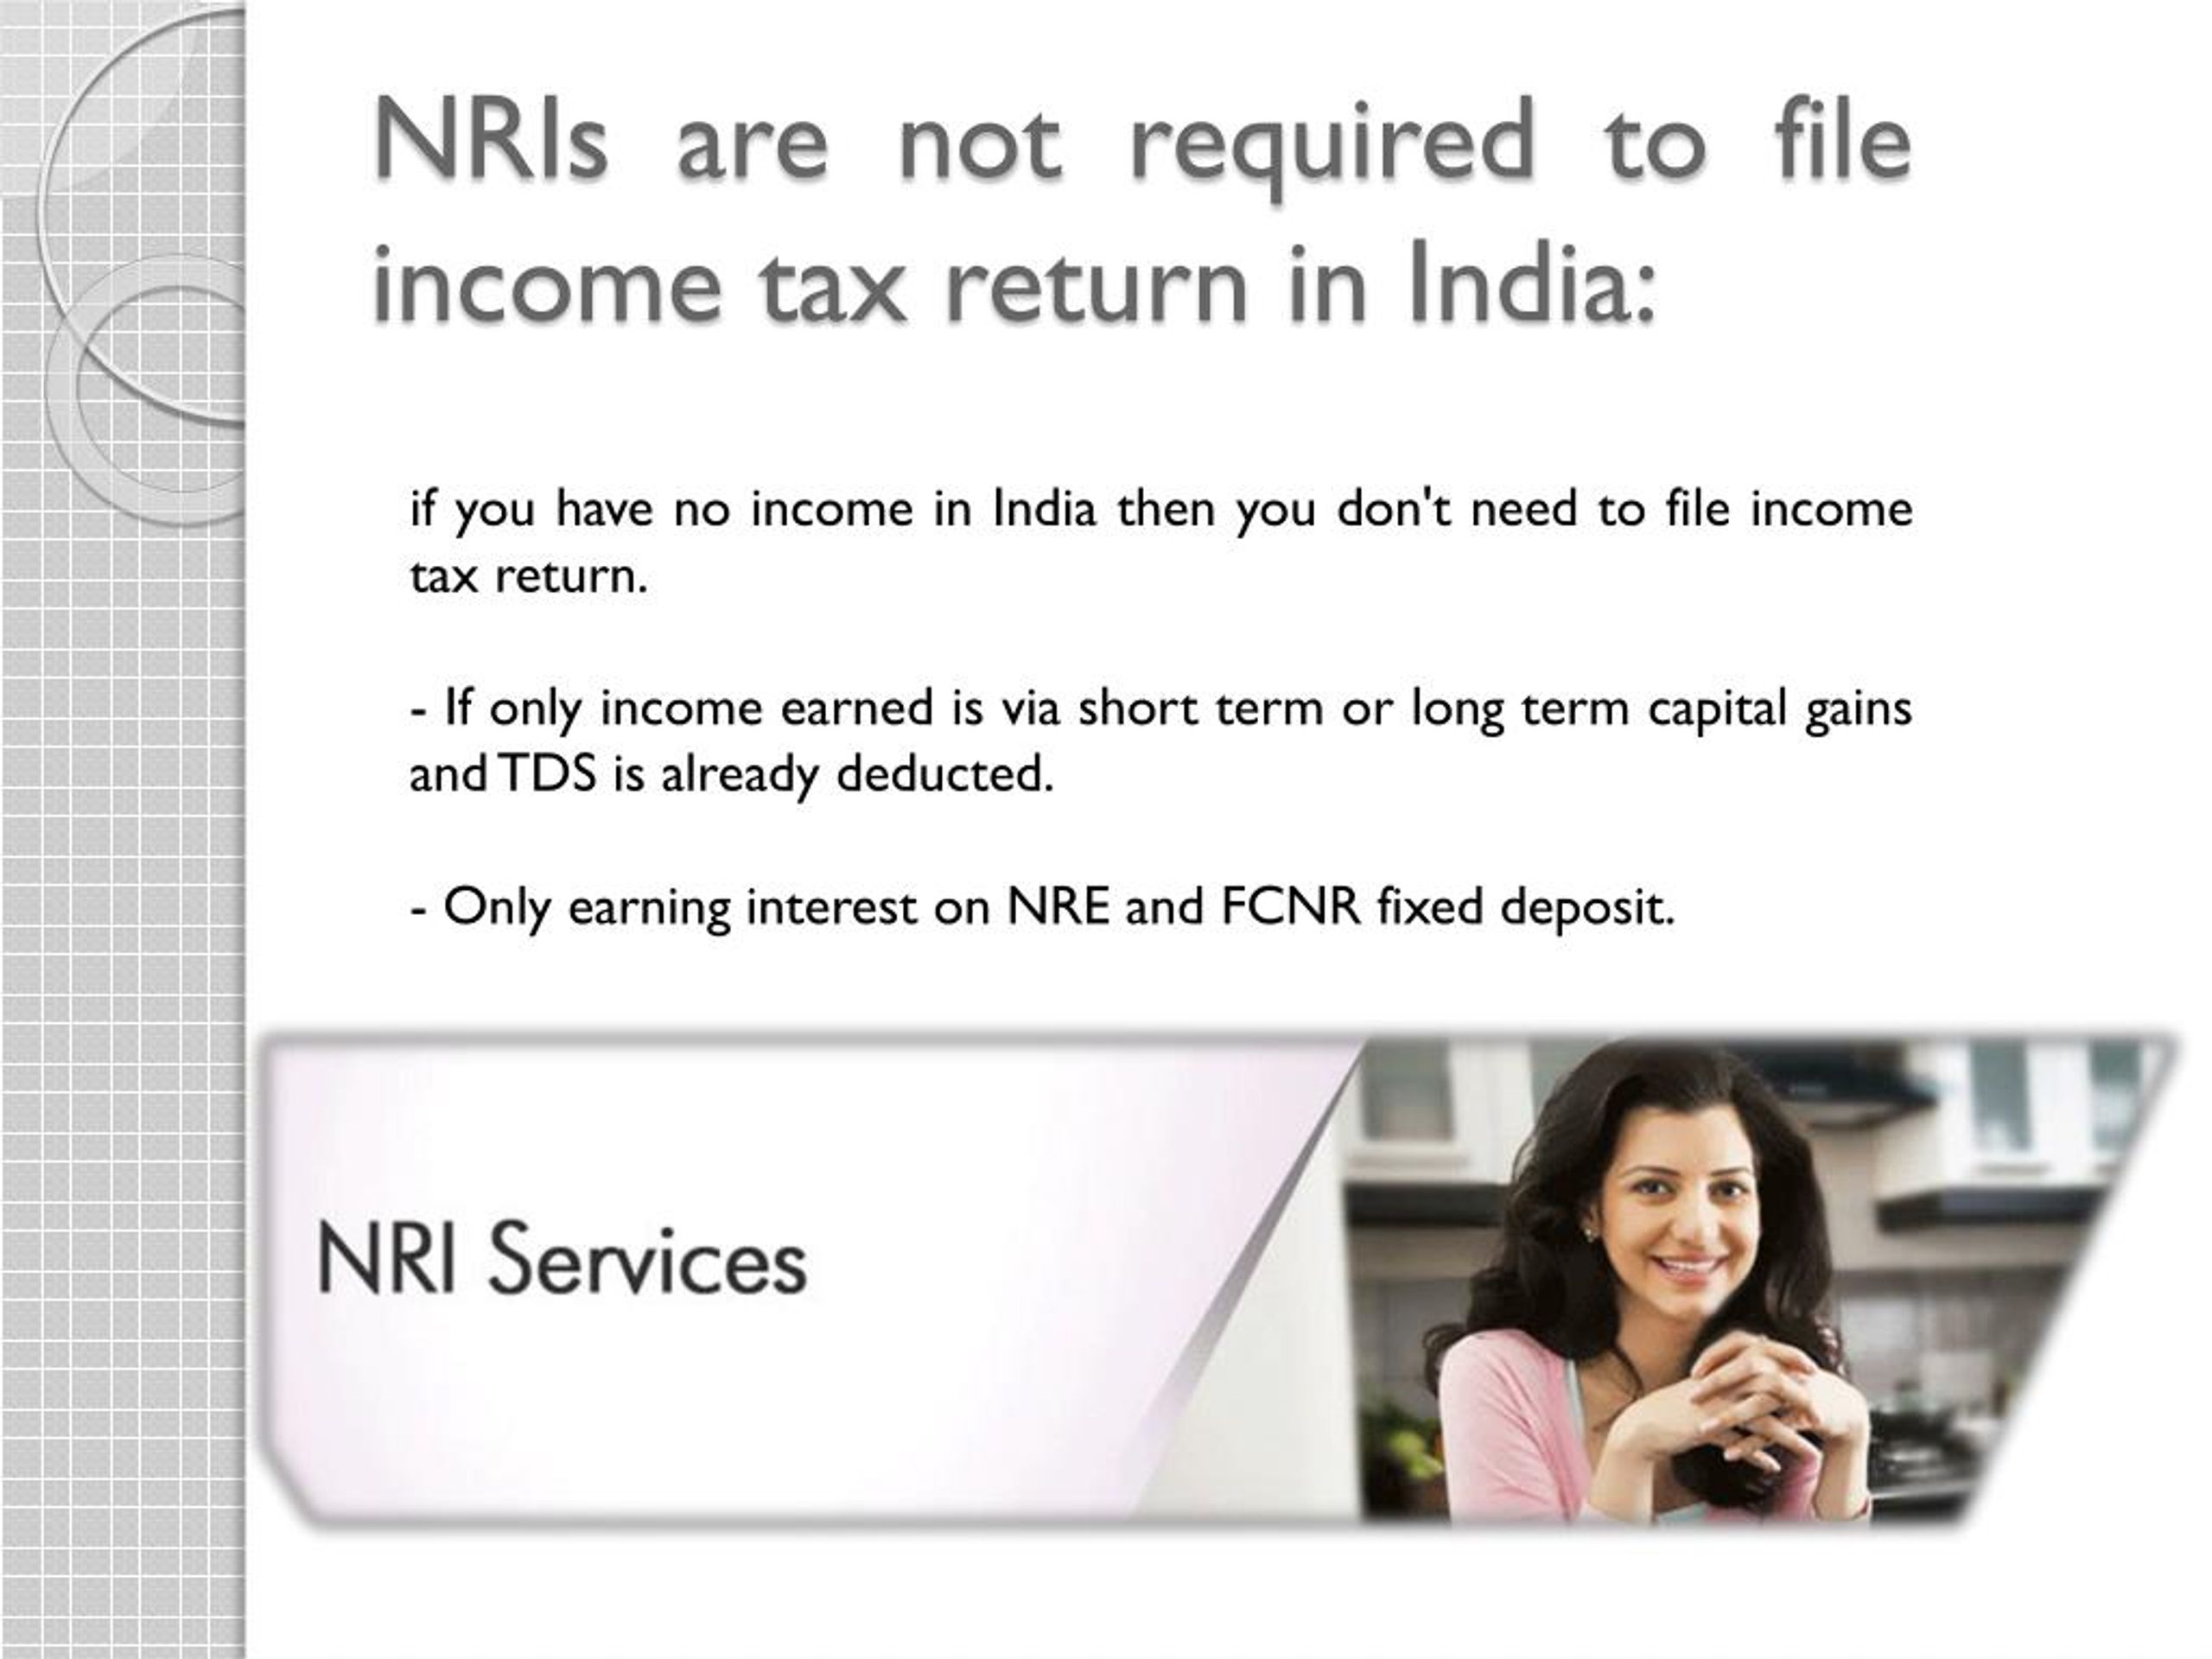 Ppt When Do Nris Need To Pay Income Tax In India Powerpoint Presentation Id7353051 